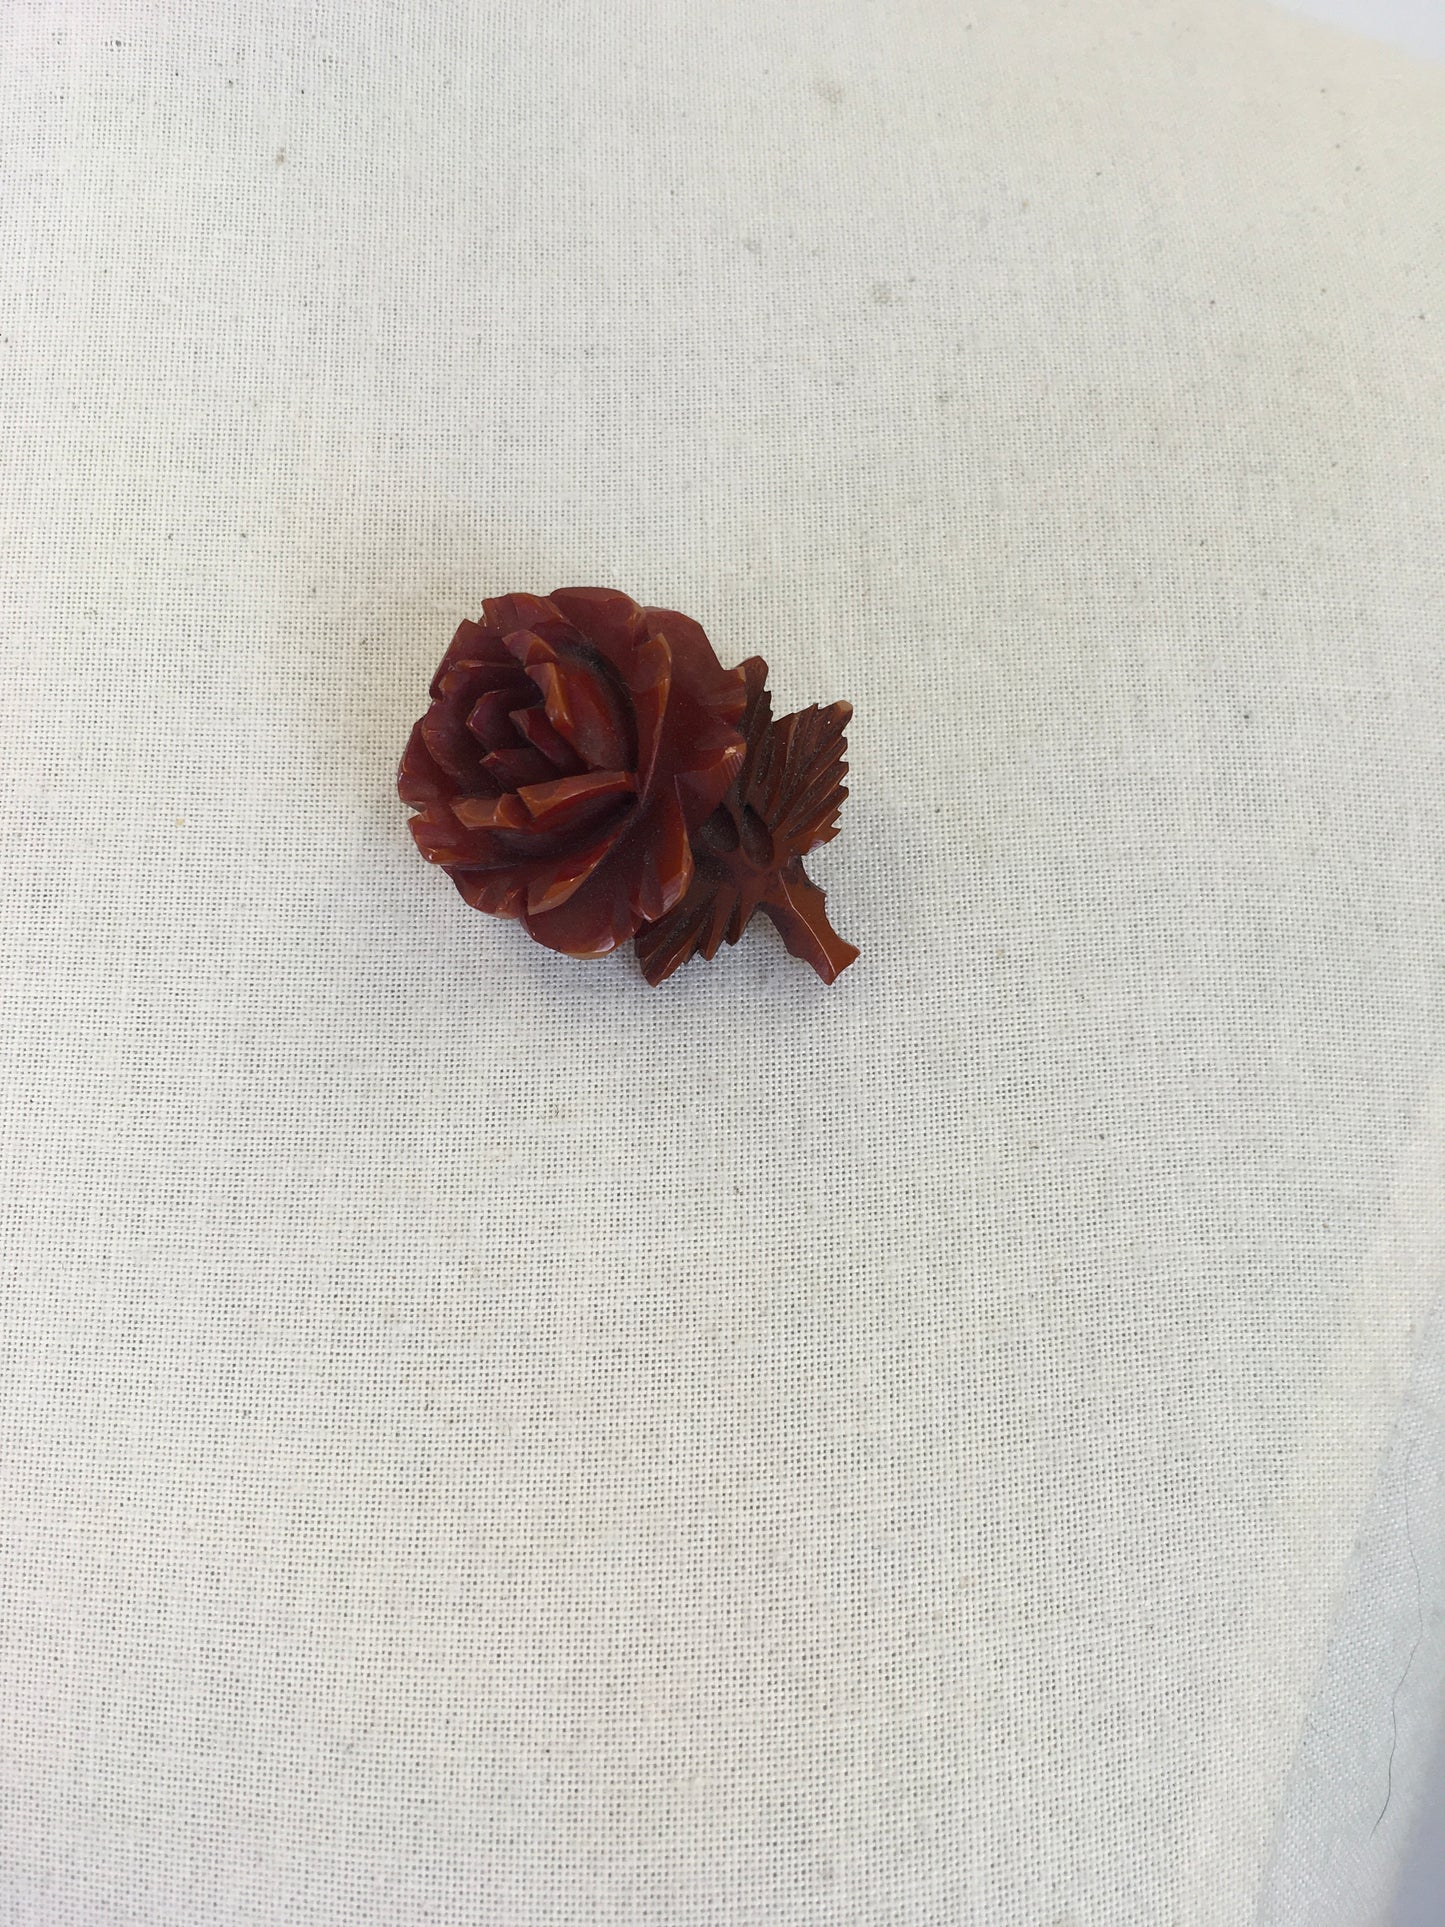 Original 1940s Rose Celluloid Brooch - In a Lovely Warm Brown